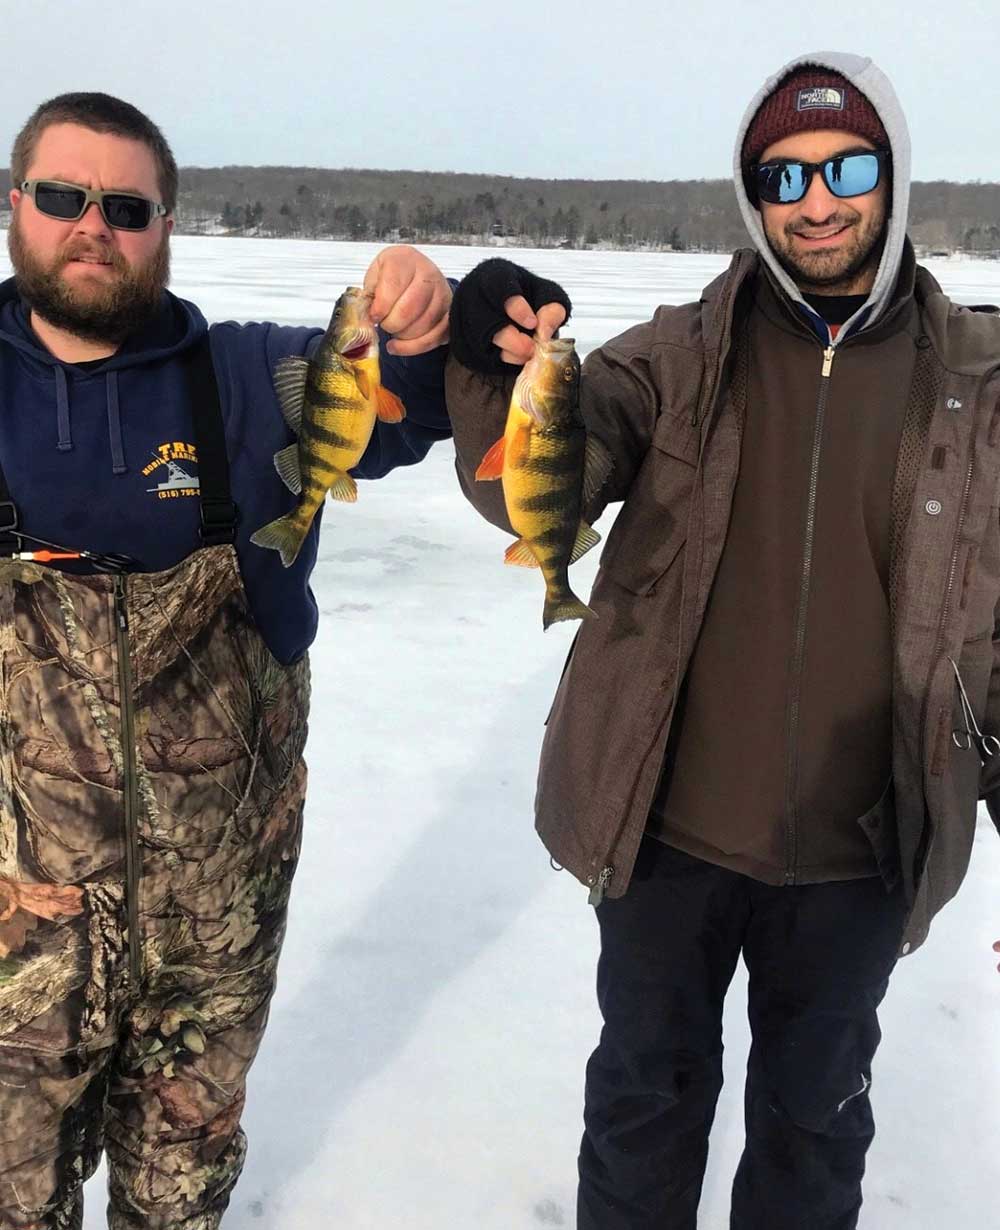 Panfish like yellow perch can provide fast paced action through the ice. 